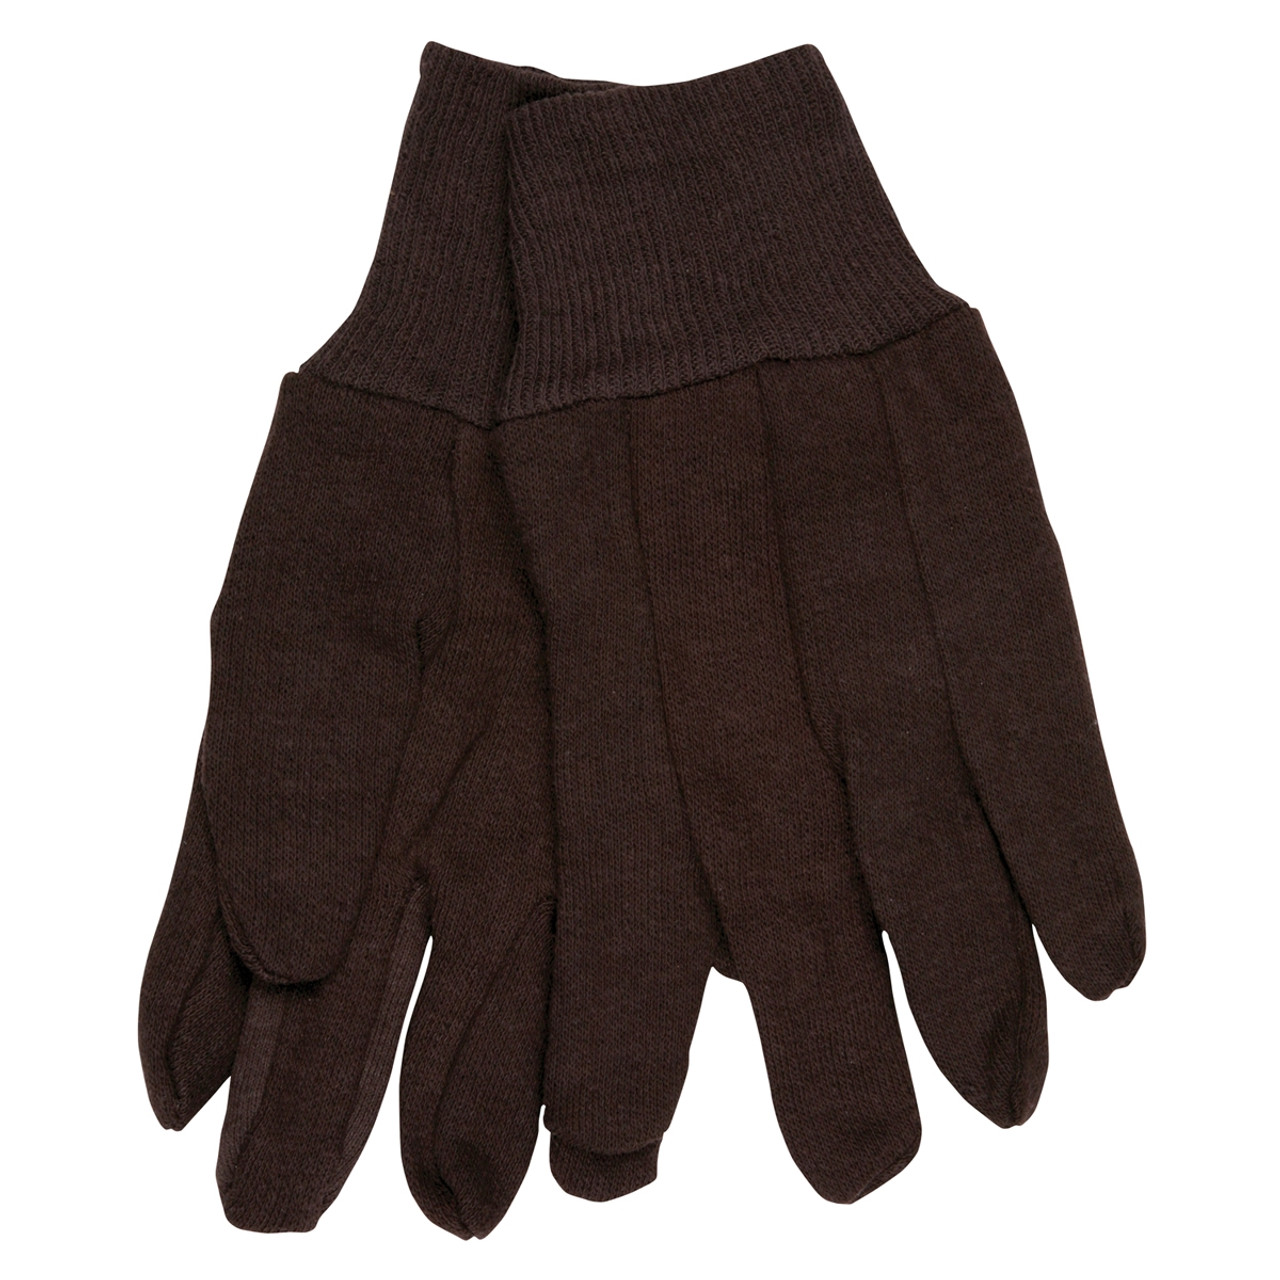 Memphis 7100P Brown Jersey Work Gloves All Cotton, Size Large (300 Pair)